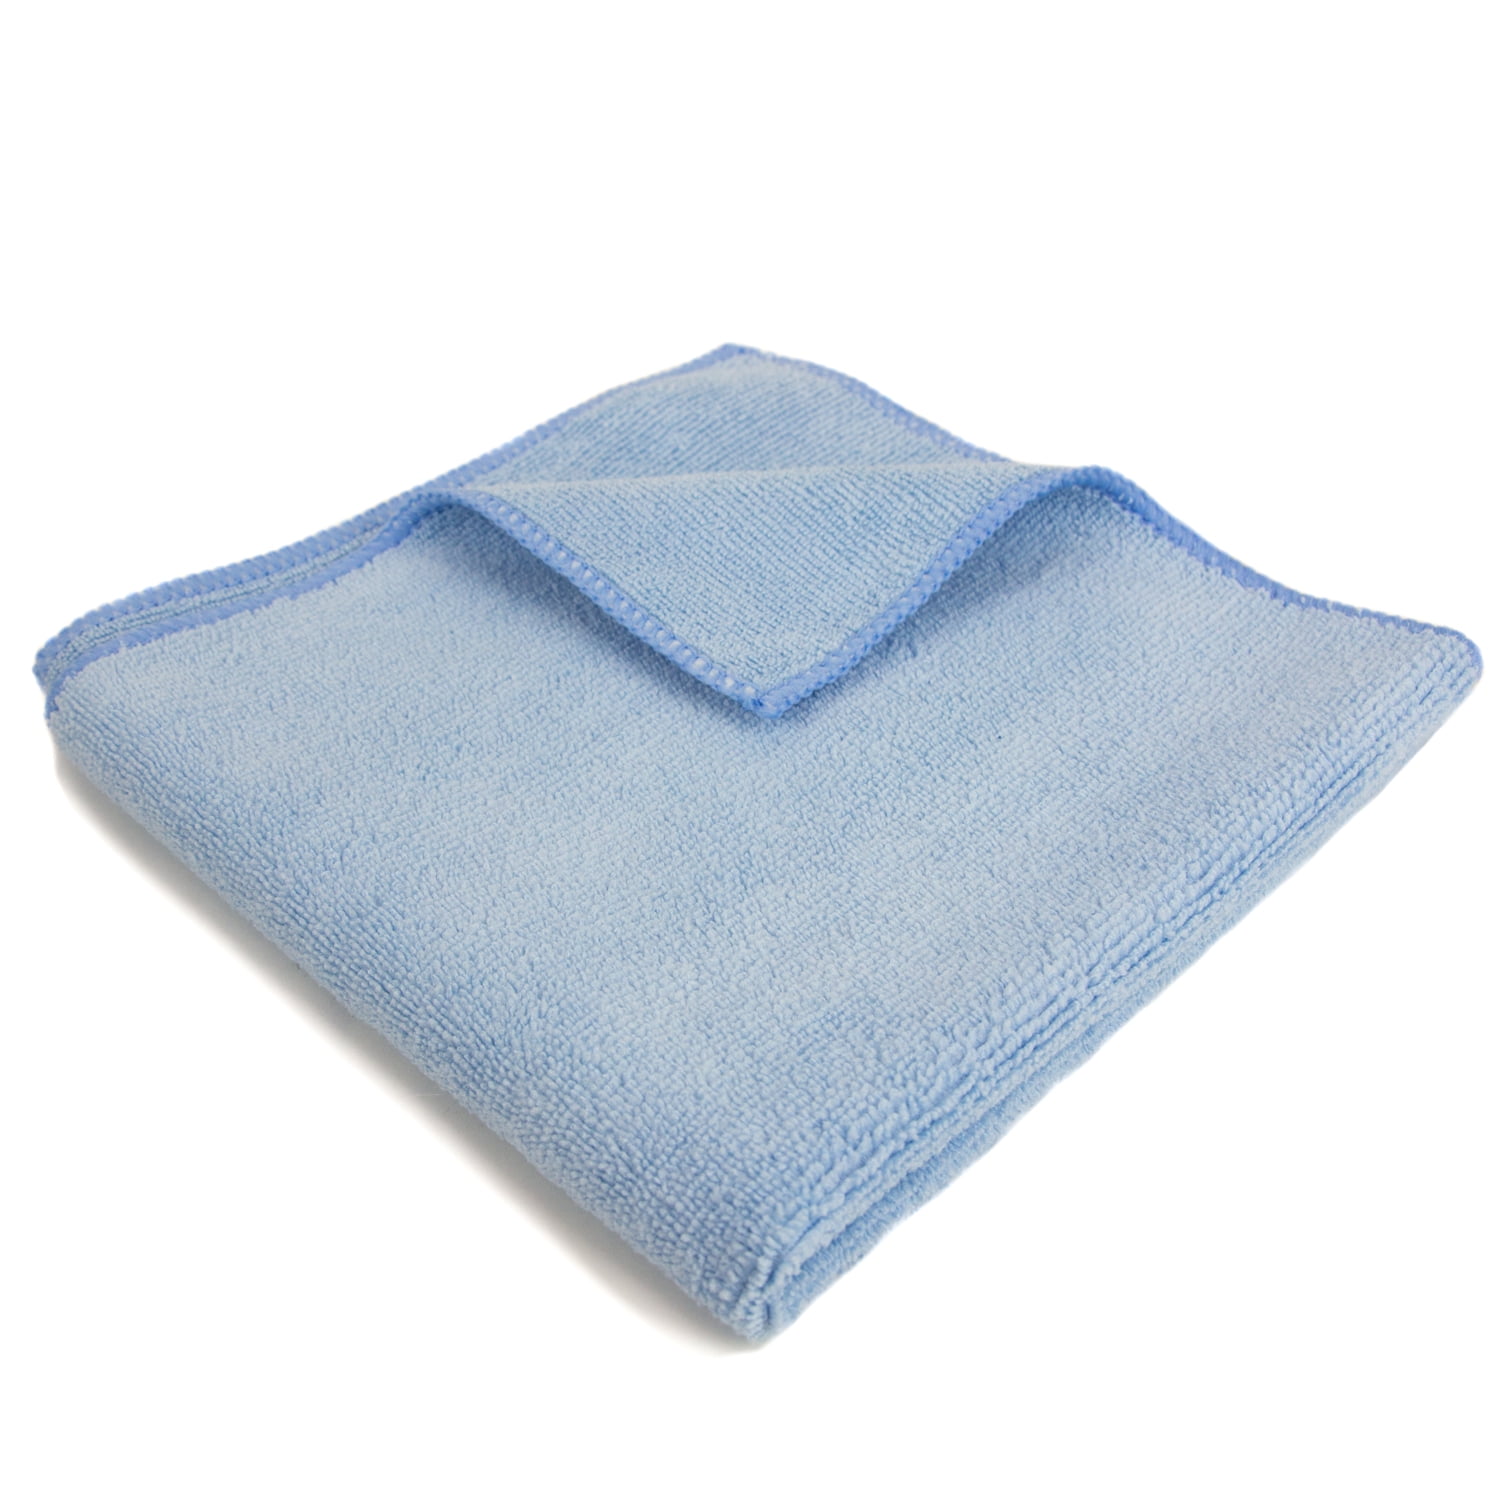 Vileda soft cloth for washing floors with 30% microfibre 4 units offer 2 + 2 